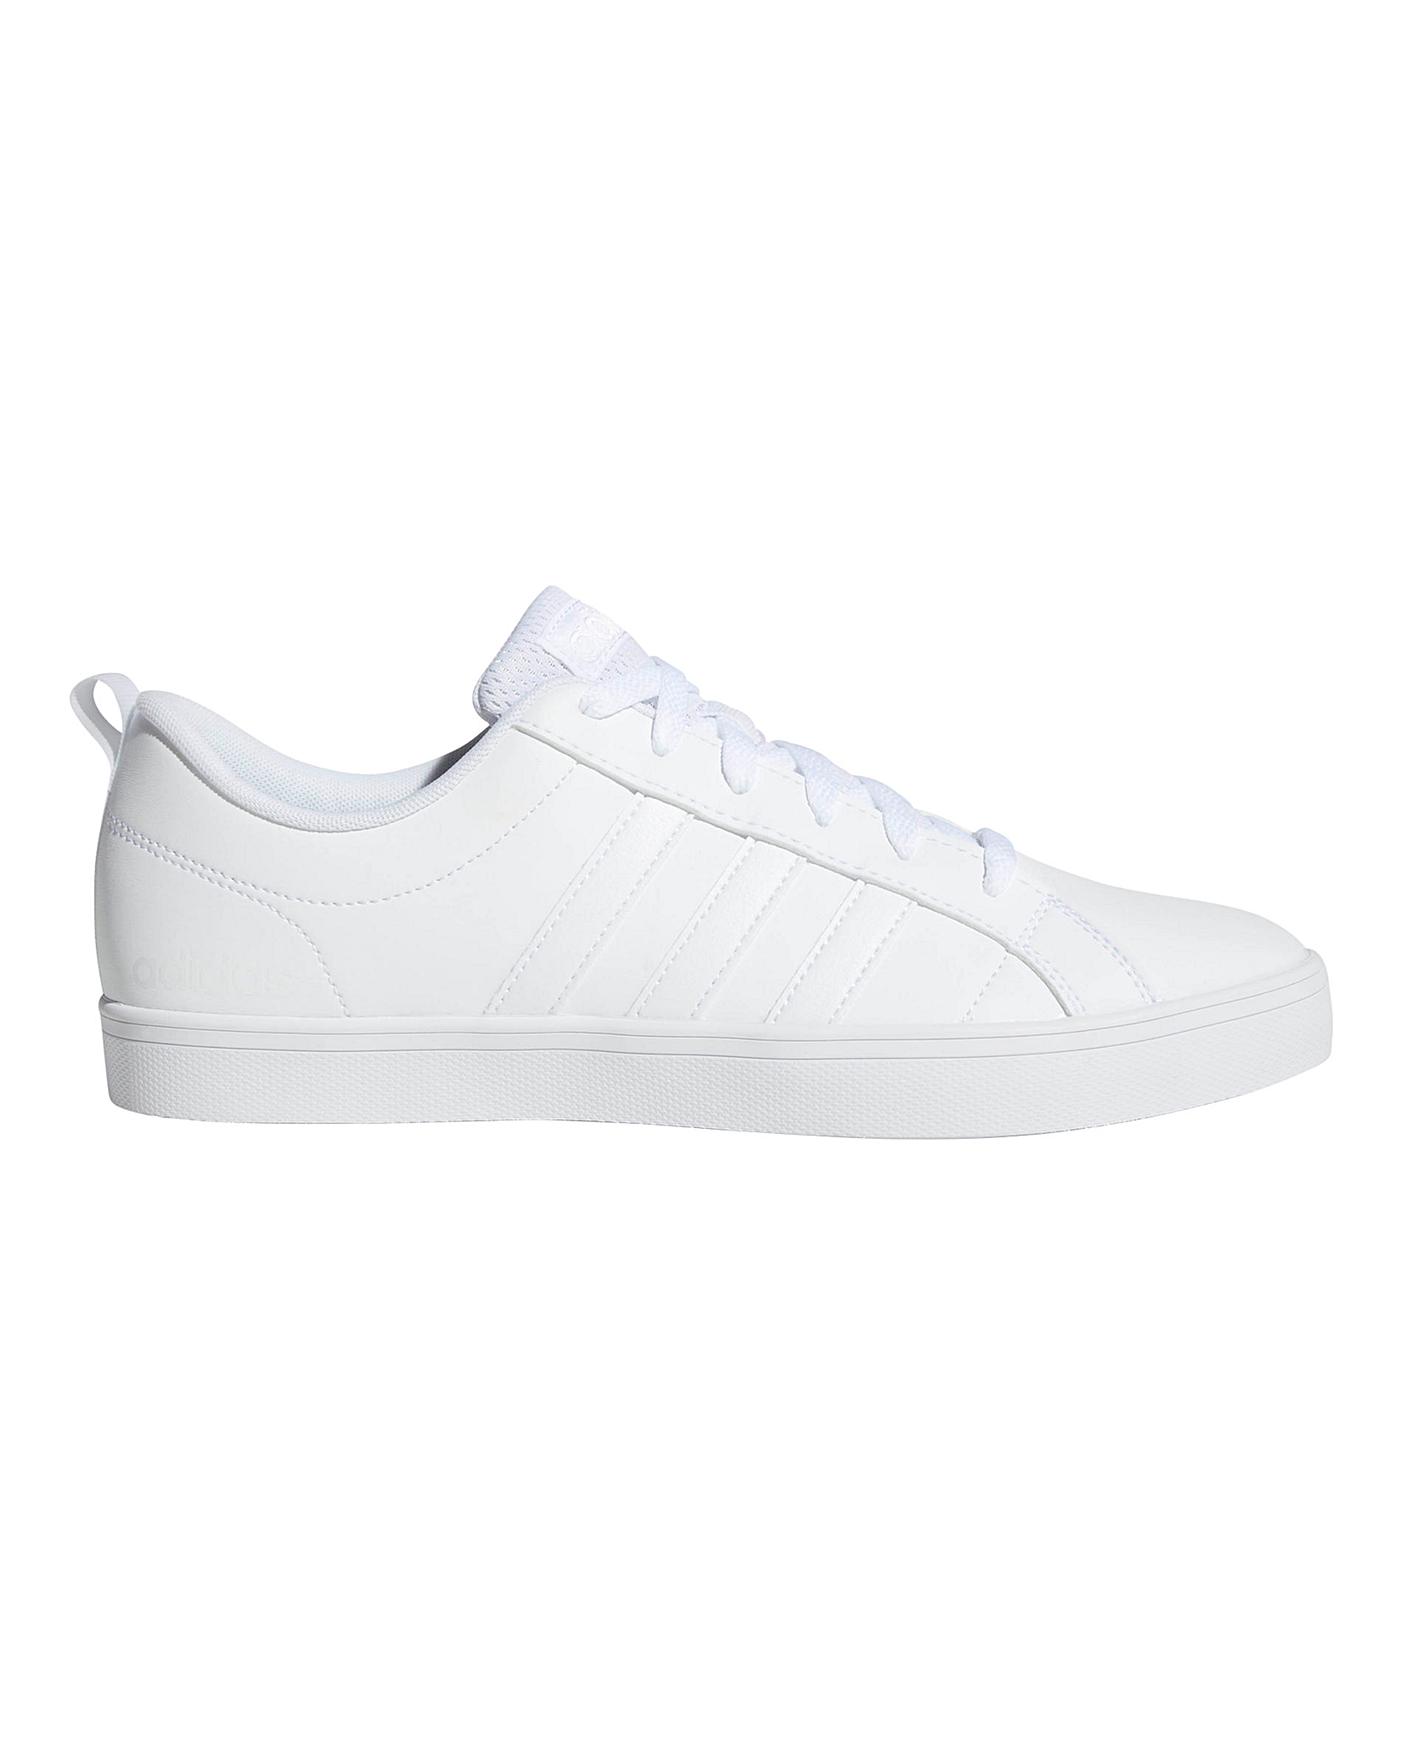 adidas vs pace white sneakers